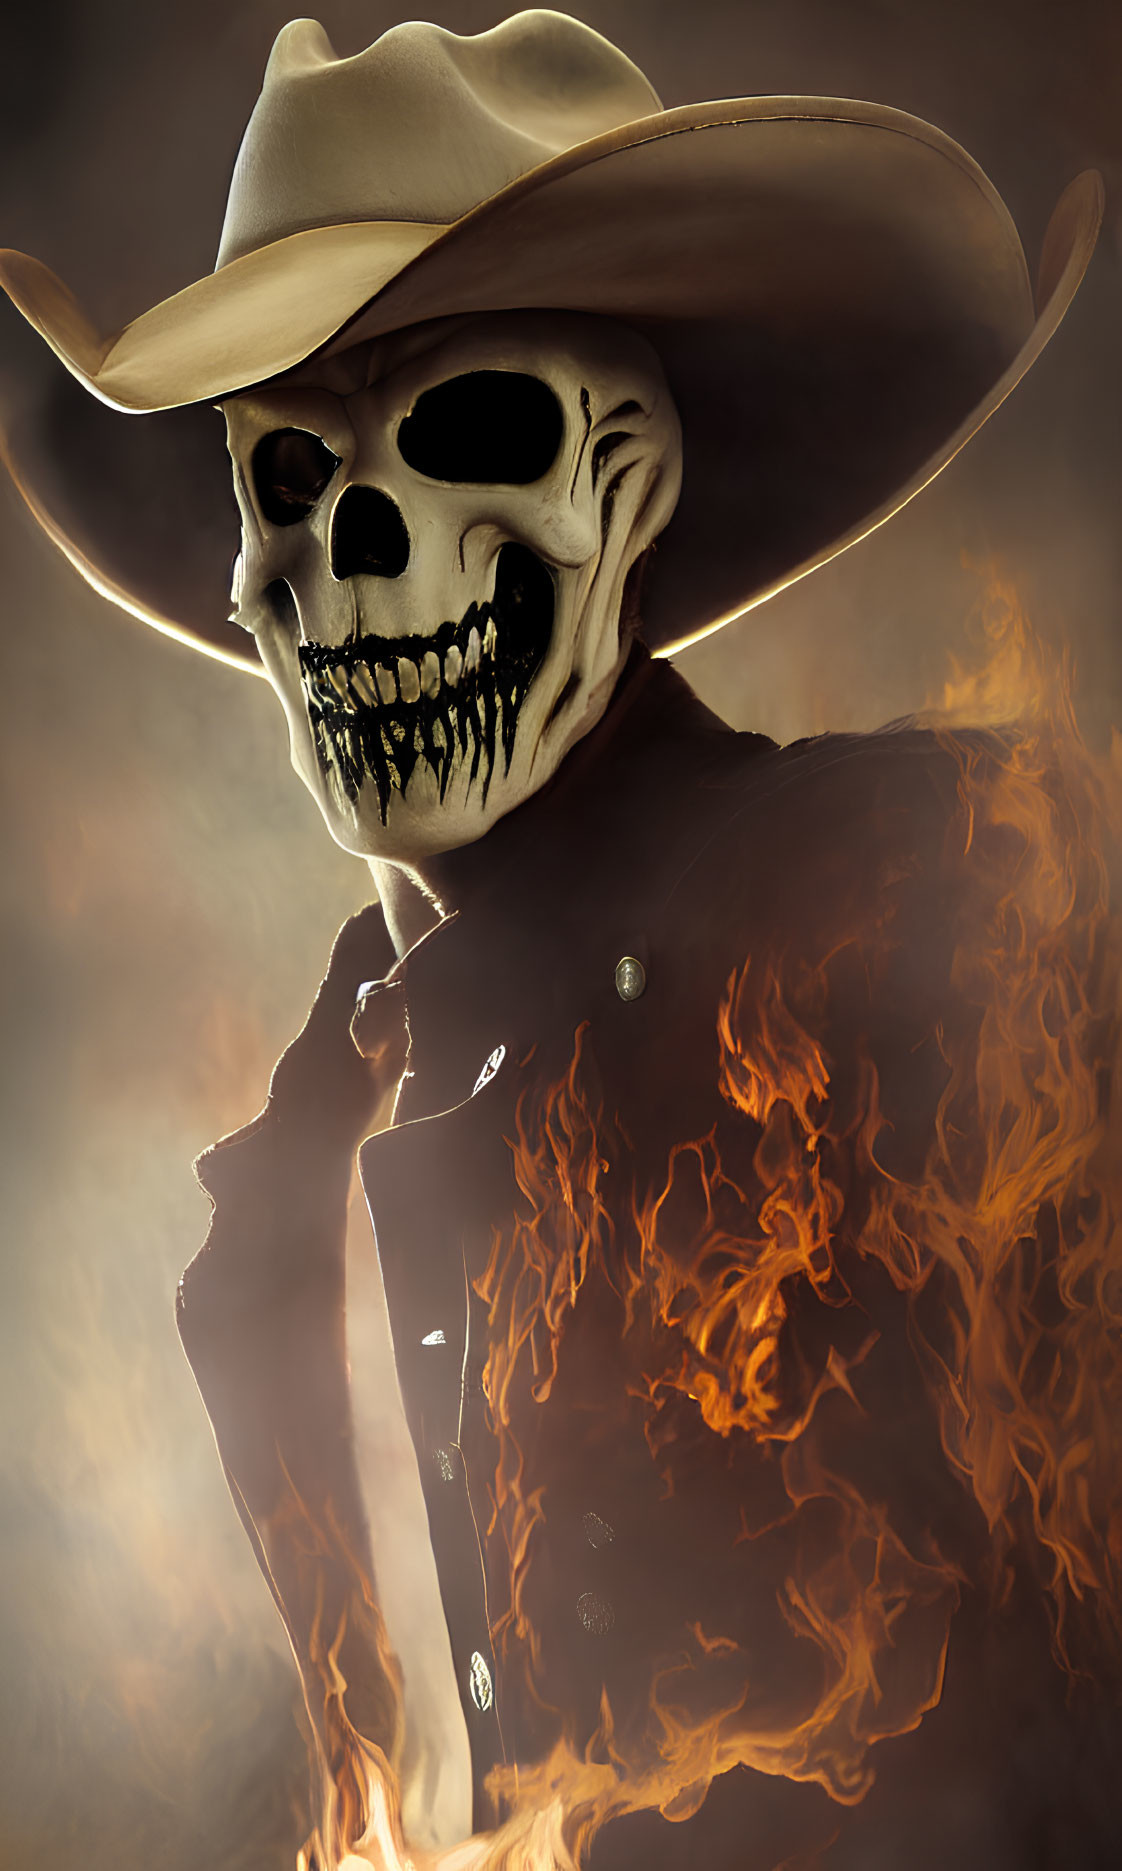 Skull-faced cowboy figure engulfed in flames